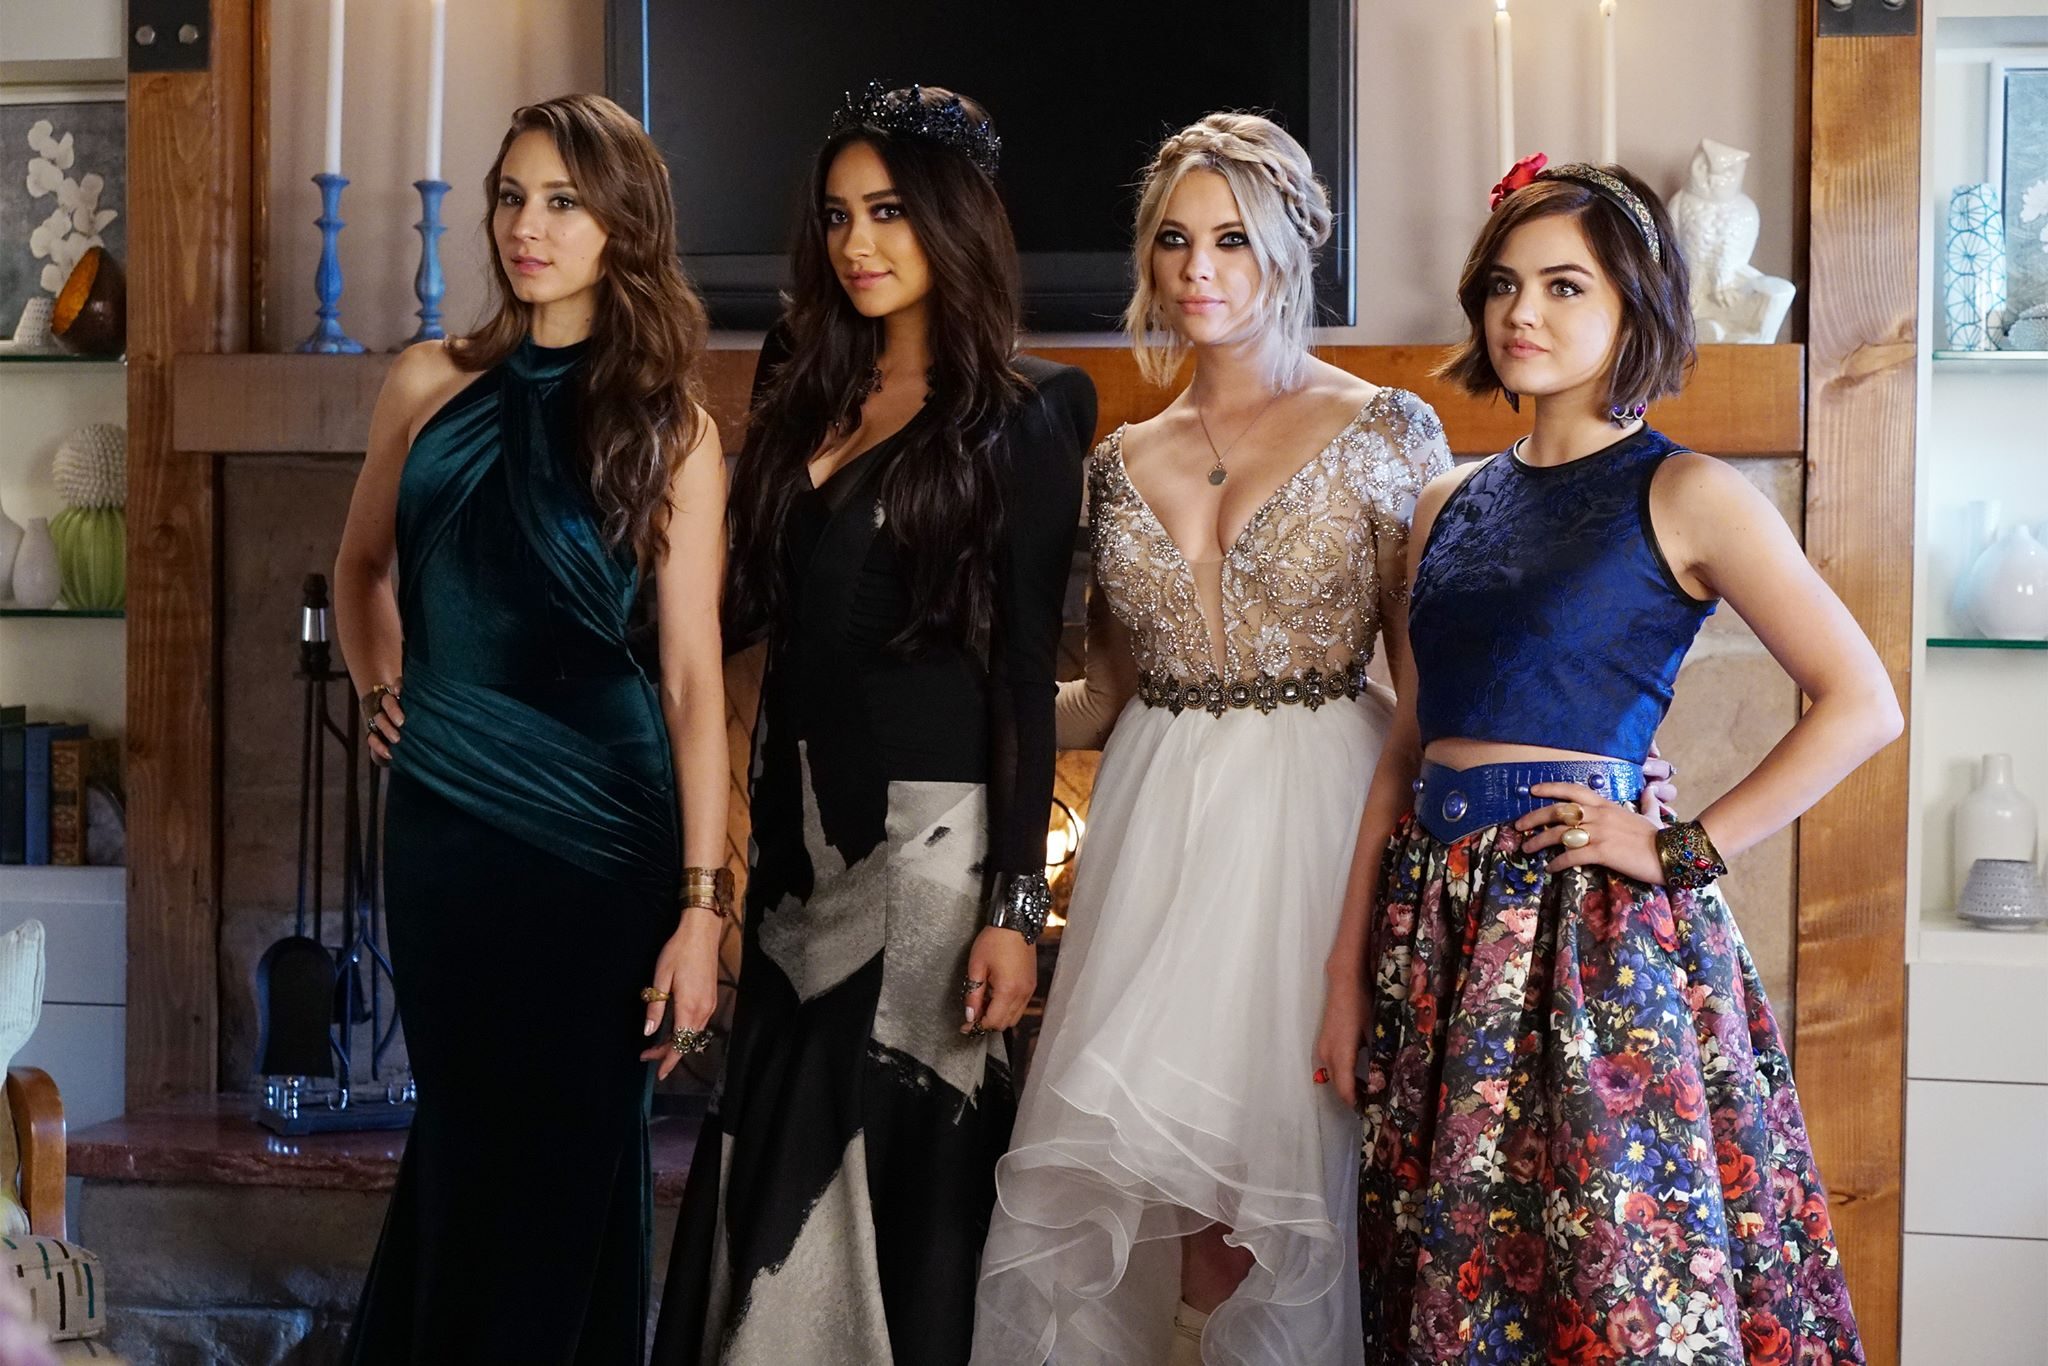 A ‘Pretty Little Liars’ TV reboot is coming